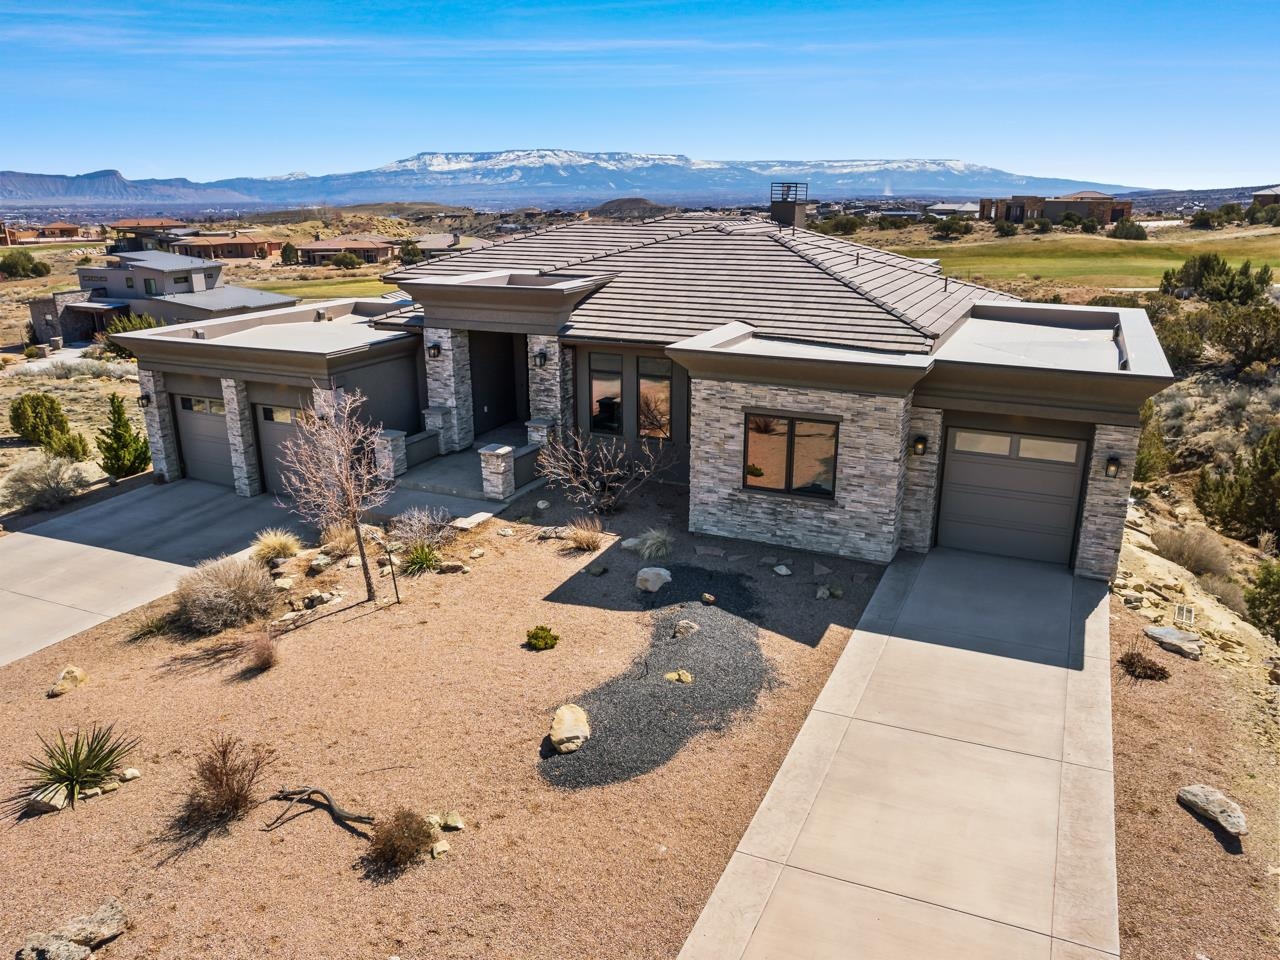 Introducing a luxurious and modern home for sale in the prestigious Redlands Mesa Community. Situated in a prime location overlooking the lushness of the first fairway and surrounded by the natural desert landscape, this stunning property offers unparalleled views and access to the award winning Redlands Mesa Golf Course. Built in 2016, this home boasts a contemporary design that seamlessly blends form and function. The sleek and modern exterior is matched by an equally stunning interior featuring beautiful finishes. Inside, the spacious living areas are flooded with natural light and offer a seamless flow between the indoor and outdoor spaces. Floor-to-ceiling windows provide breathtaking views of the golf course, Grand Mesa, and Bookcliffs, while the open floor plan creates an inviting atmosphere for gatherings and entertaining guests. The gourmet kitchen is a chef's dream, with  ample storage space and a large island with seating, perfect for casual dining, while the adjacent dining area is ideal for more formal occasions. The primary suite is a private oasis, with a spa-like en-suite bathroom and large walk-in closet. Outside, the expansive east-facing deck is the perfect spot to take in the stunning views while enjoying a meal or relaxing with a book, without getting baked by the afternoon sun. Relax in the hot tub instead of mowing grass - as the extra-large lot is low-maintenance and provides protection for your views. The home also comes fully furnished with the perfect decor and accouterments. This home truly has it all - luxury, views, modern design, and access to one of the best golf courses in Western Colorado. Just around the corner from the clubhouse, restaurant and bar! Don't miss your chance to own this exceptional property in the Redlands area of Grand Junction.